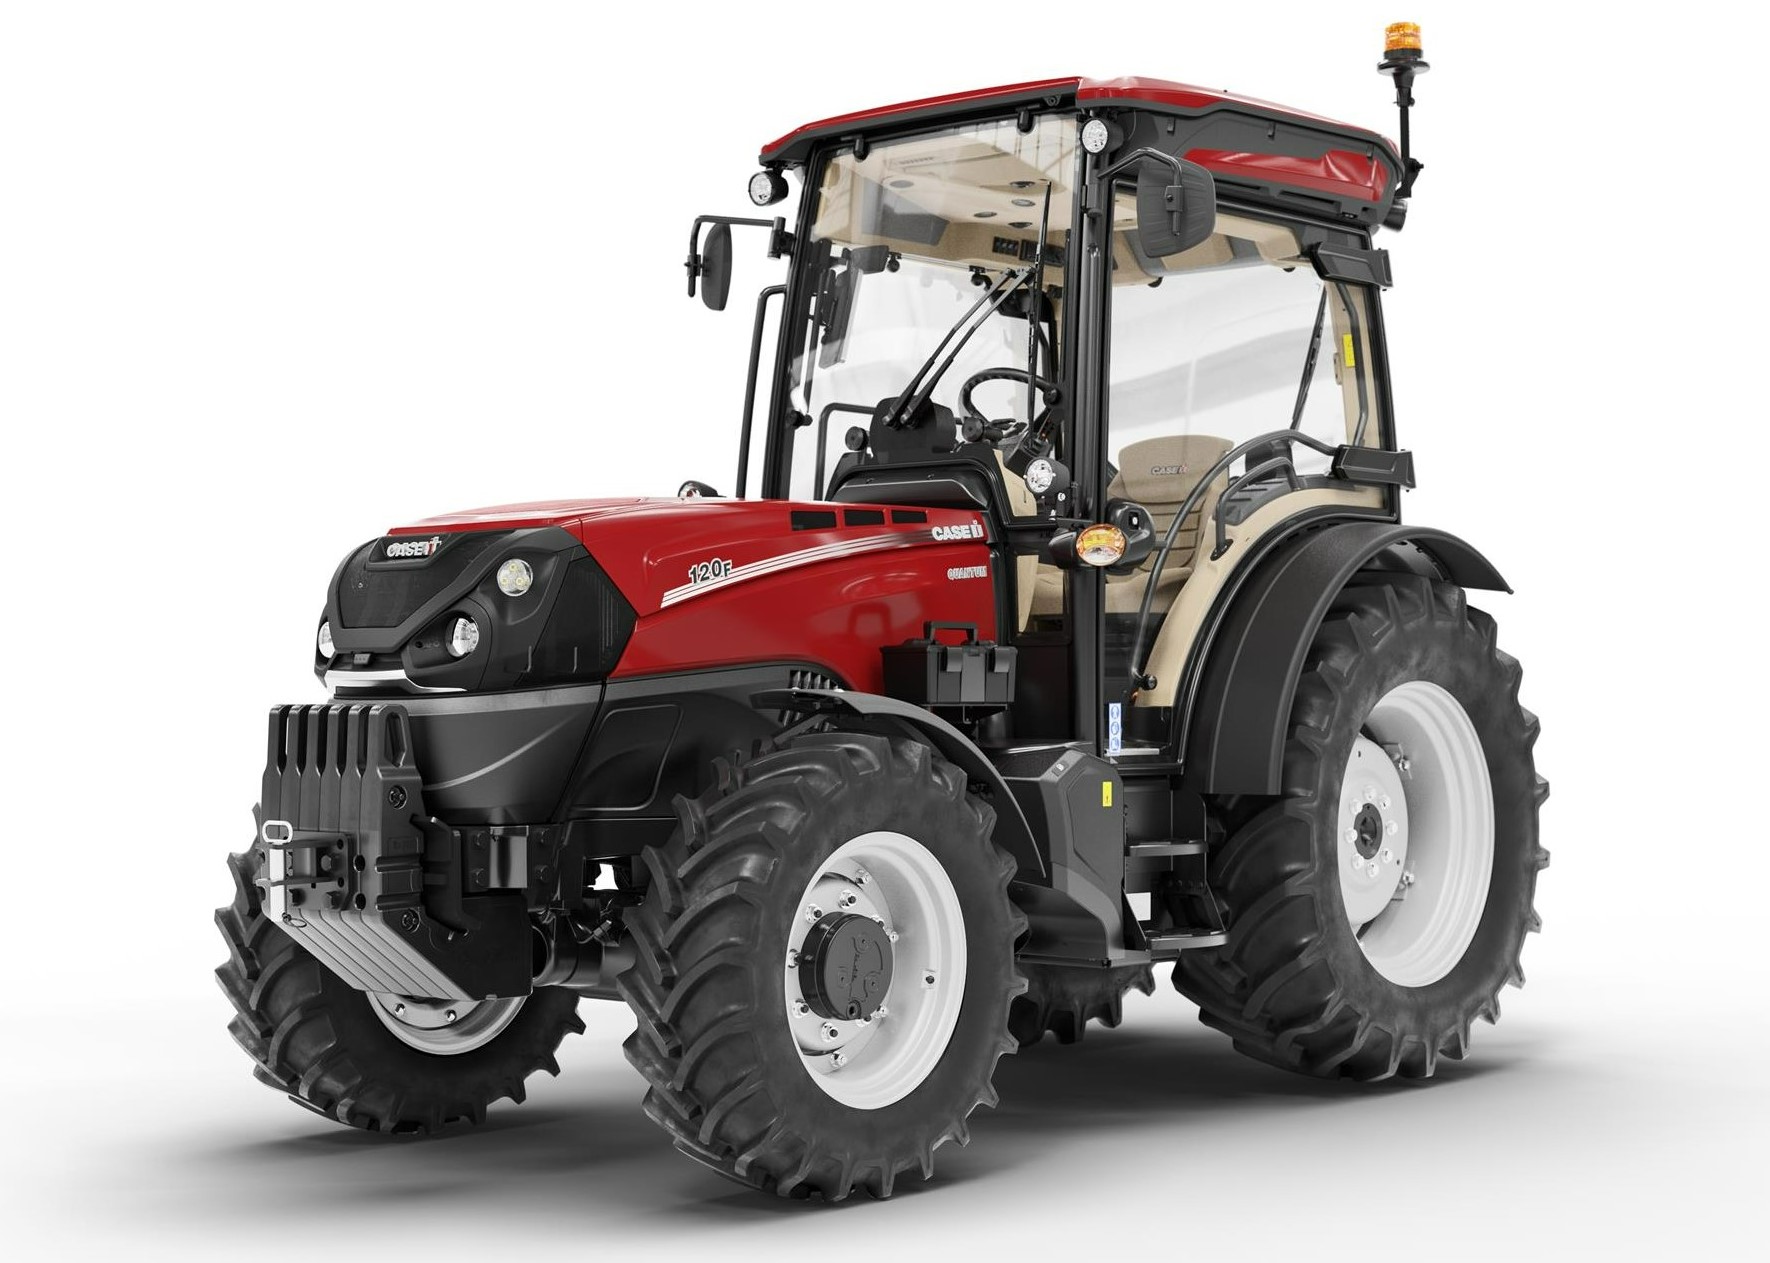 THE SUITABLE TRACTORS FOR ANY SPECIALIZED WORK